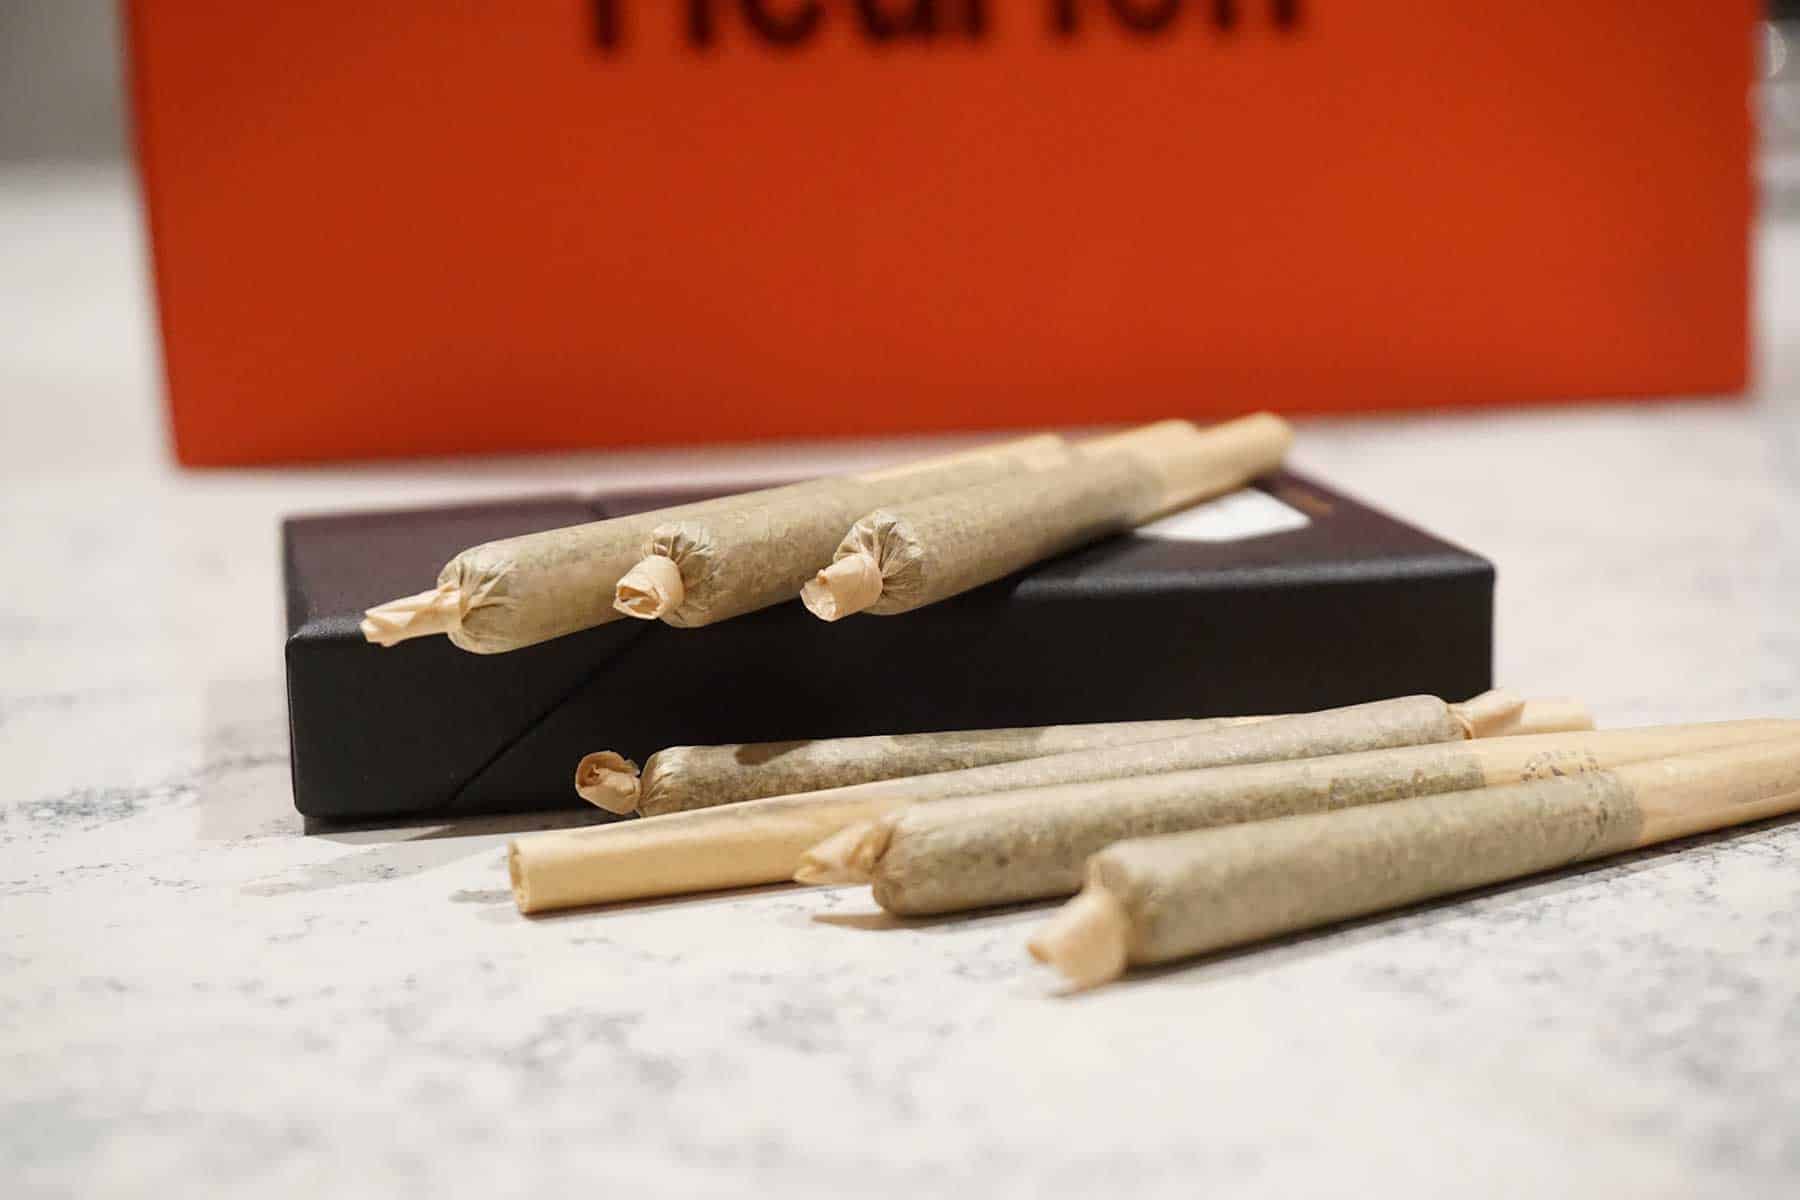 The Art of Rolling the Perfect Cannabis Joint